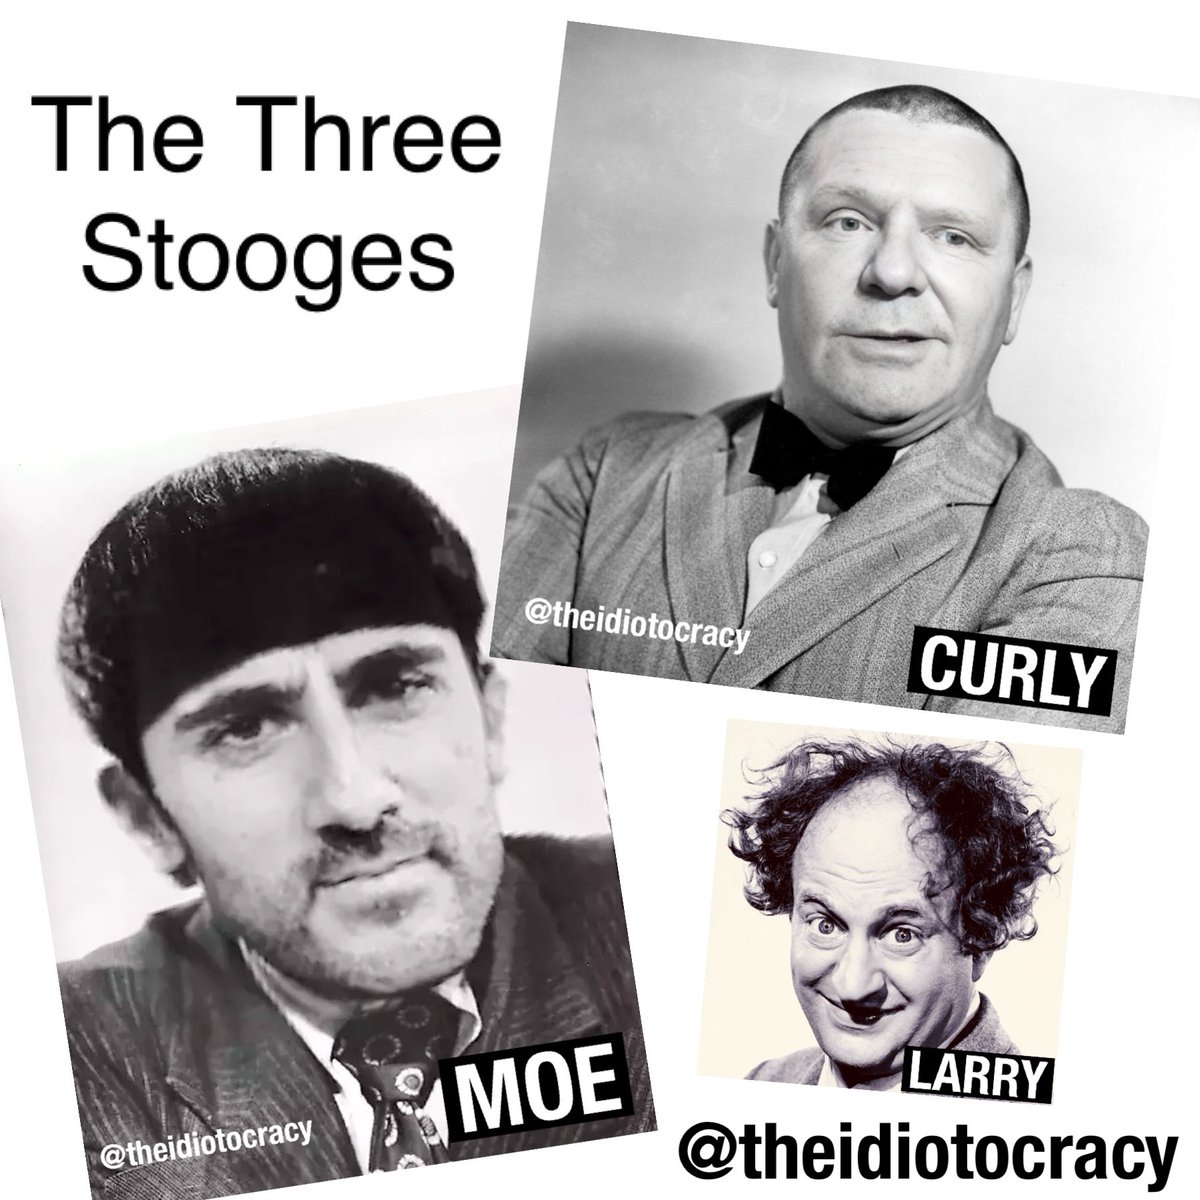 Two Stooges (and Larry) #onpoli #onted #thethreestooges